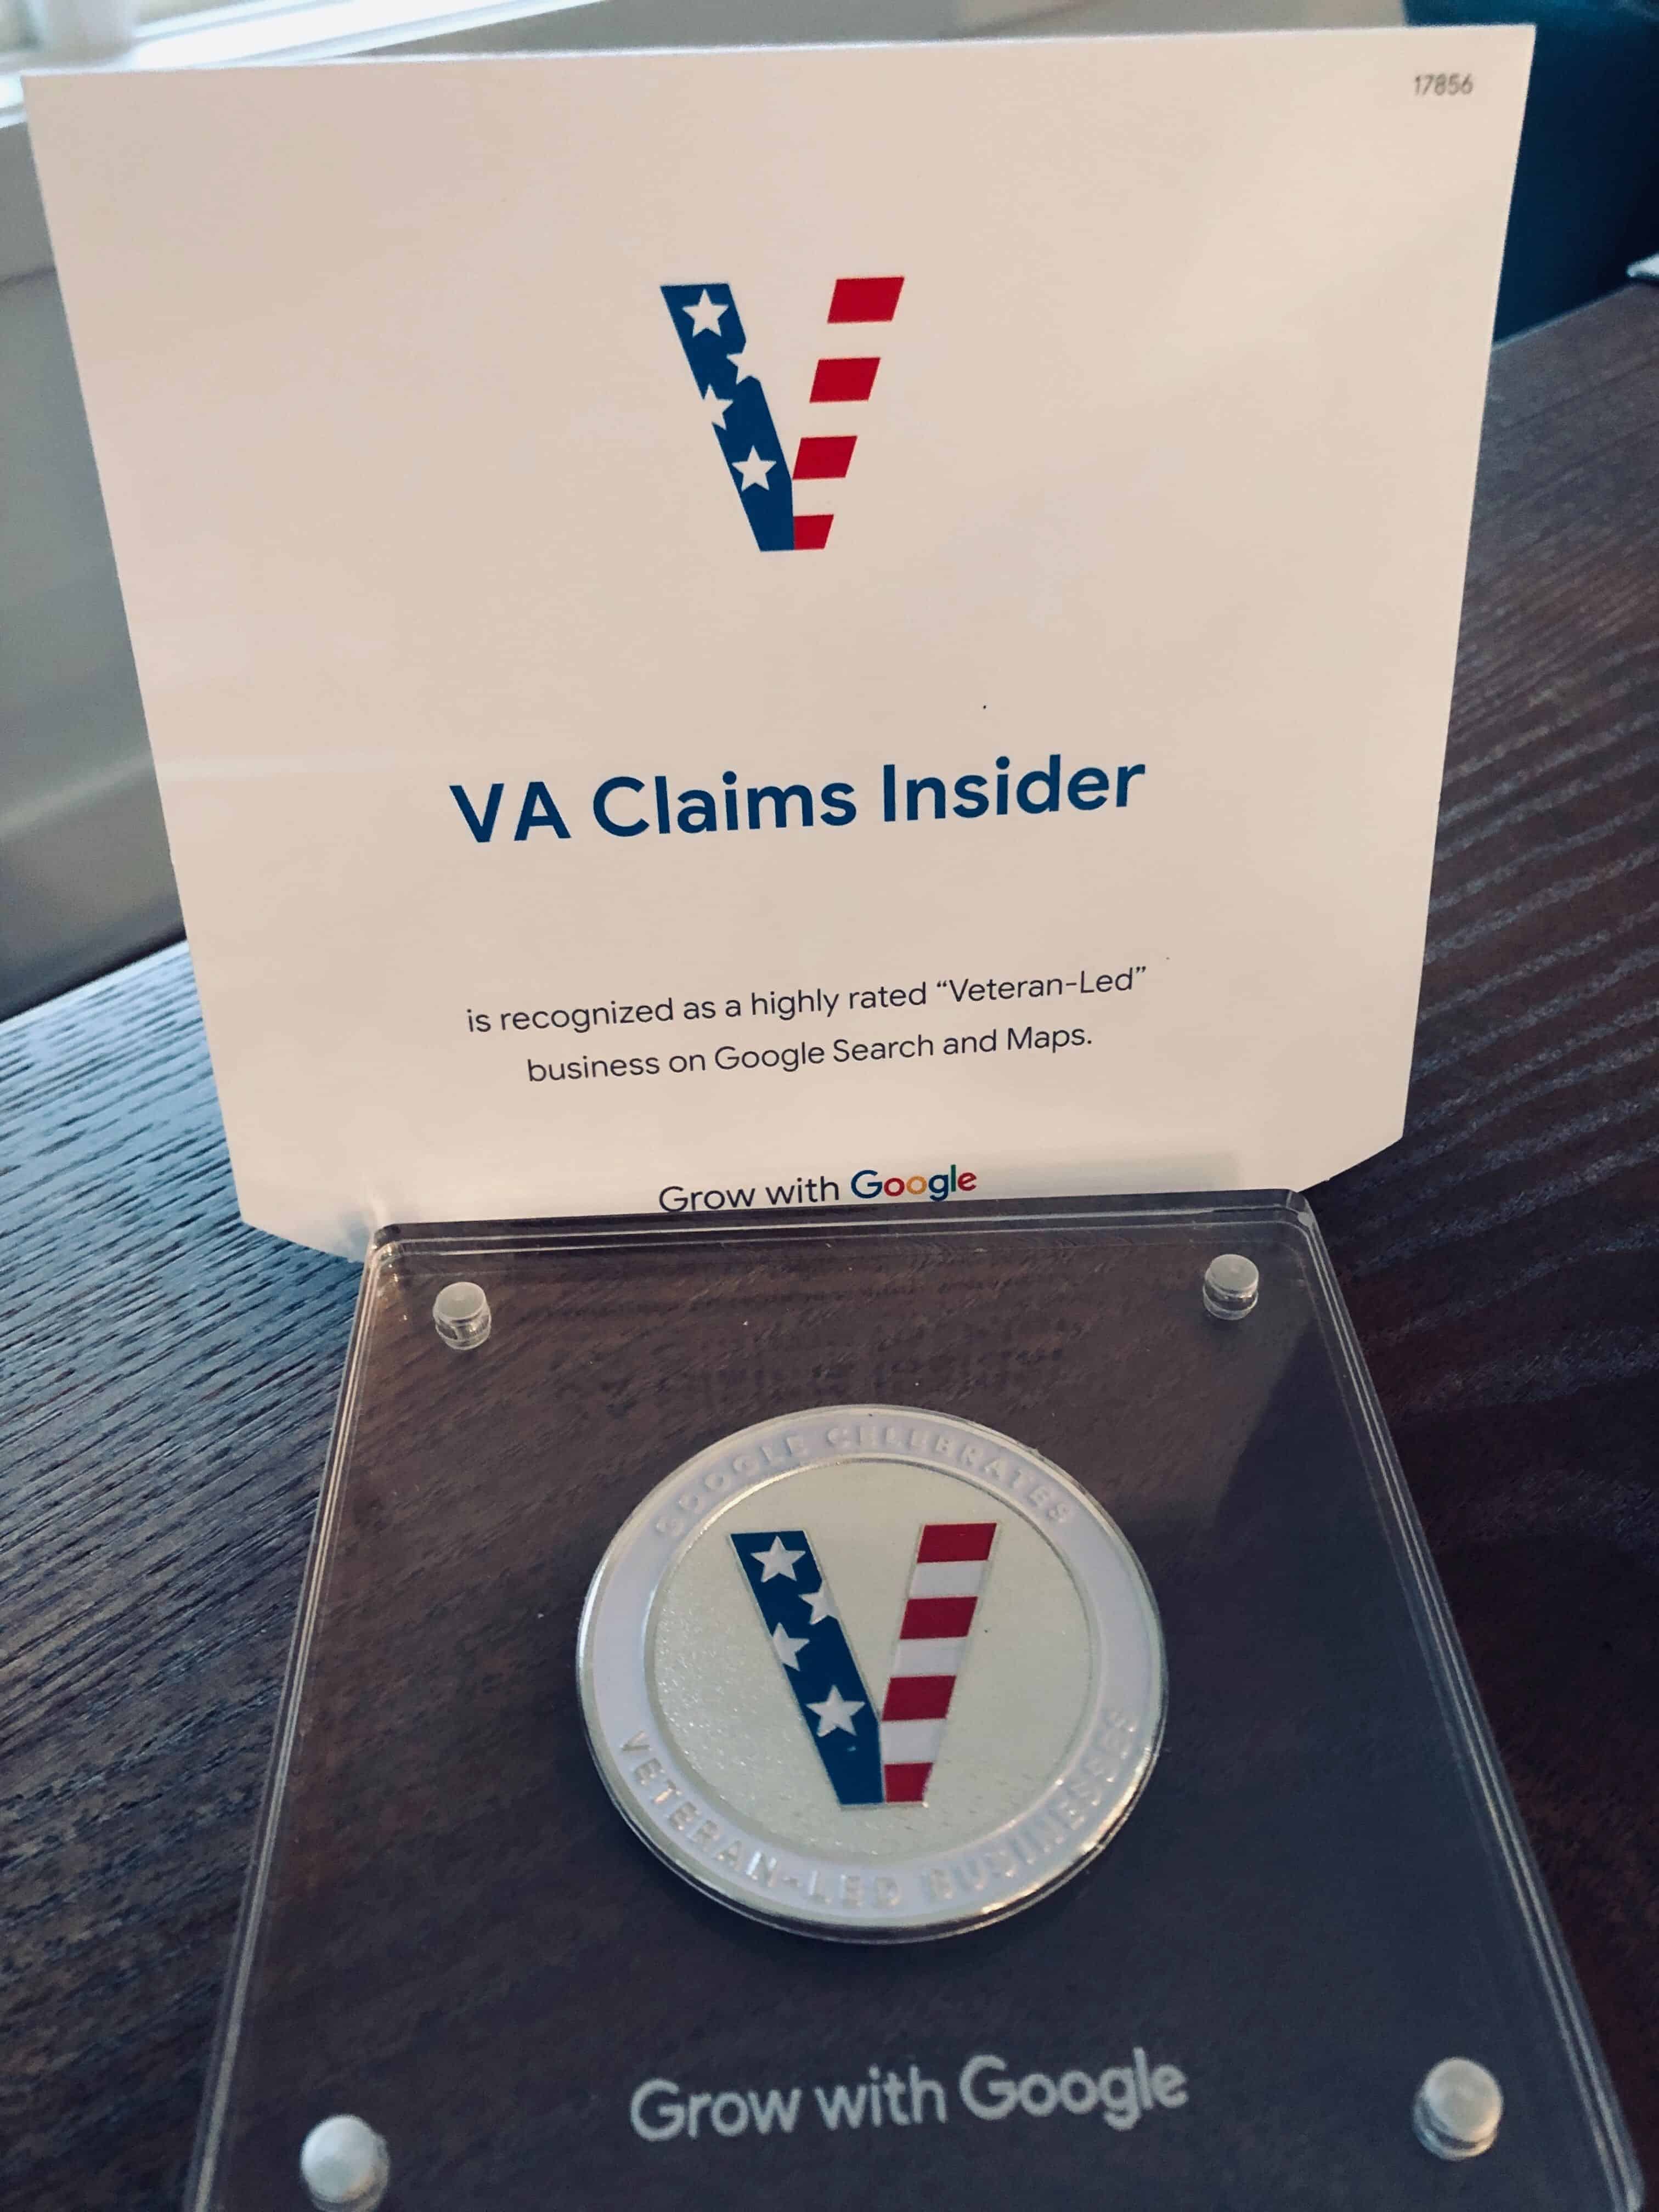 VA Claims Insider Highly Rated "Veteran-Led" Business on Google